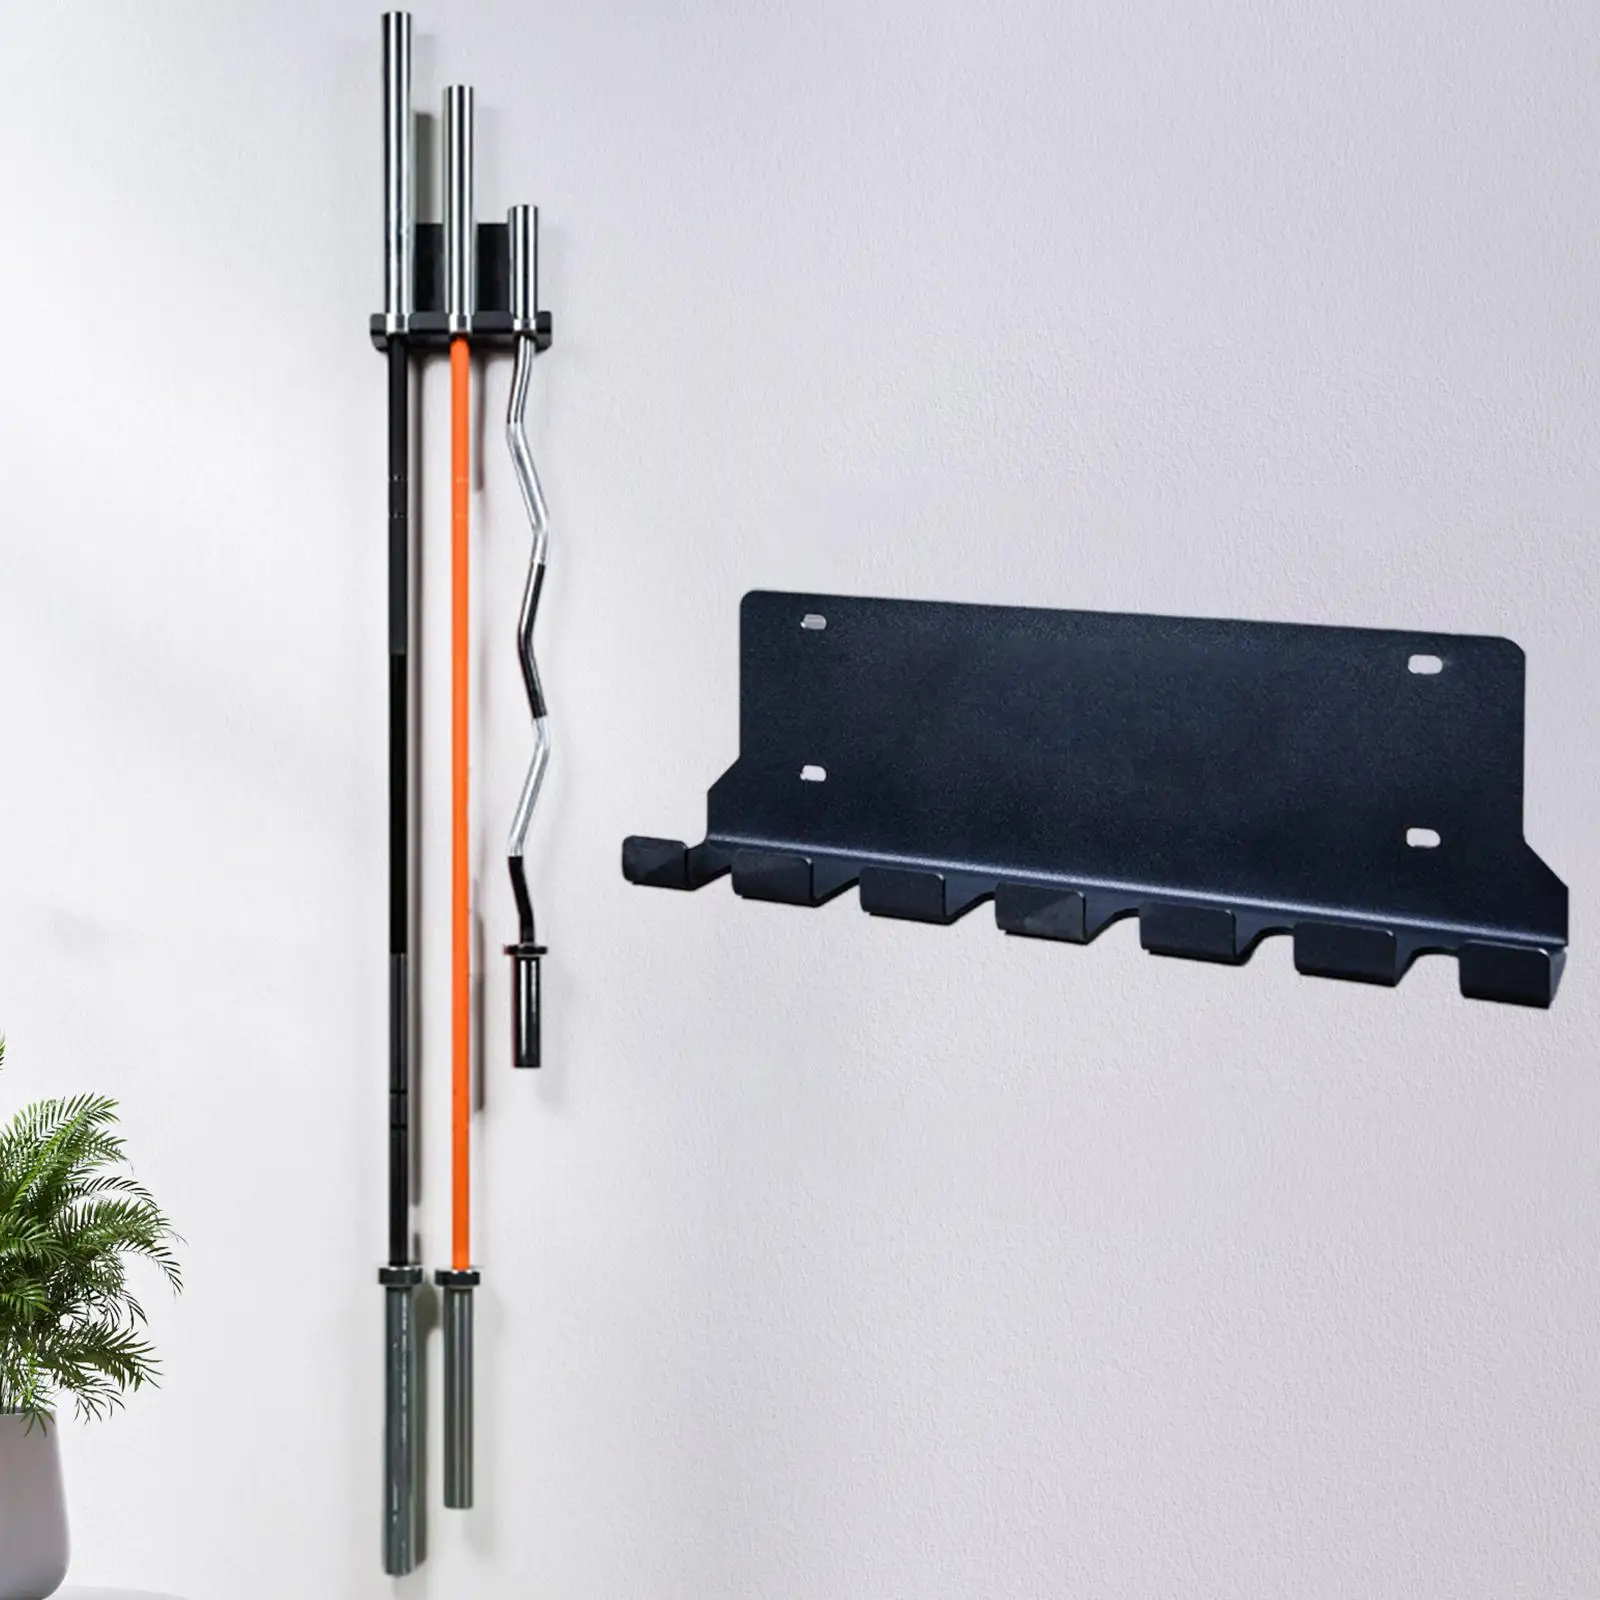 Barbell Storage Holder Rack Display Weight Bar Rack Wall Mount Hanging Wall Hanger for Workout Garage Fitness Gym Accessories